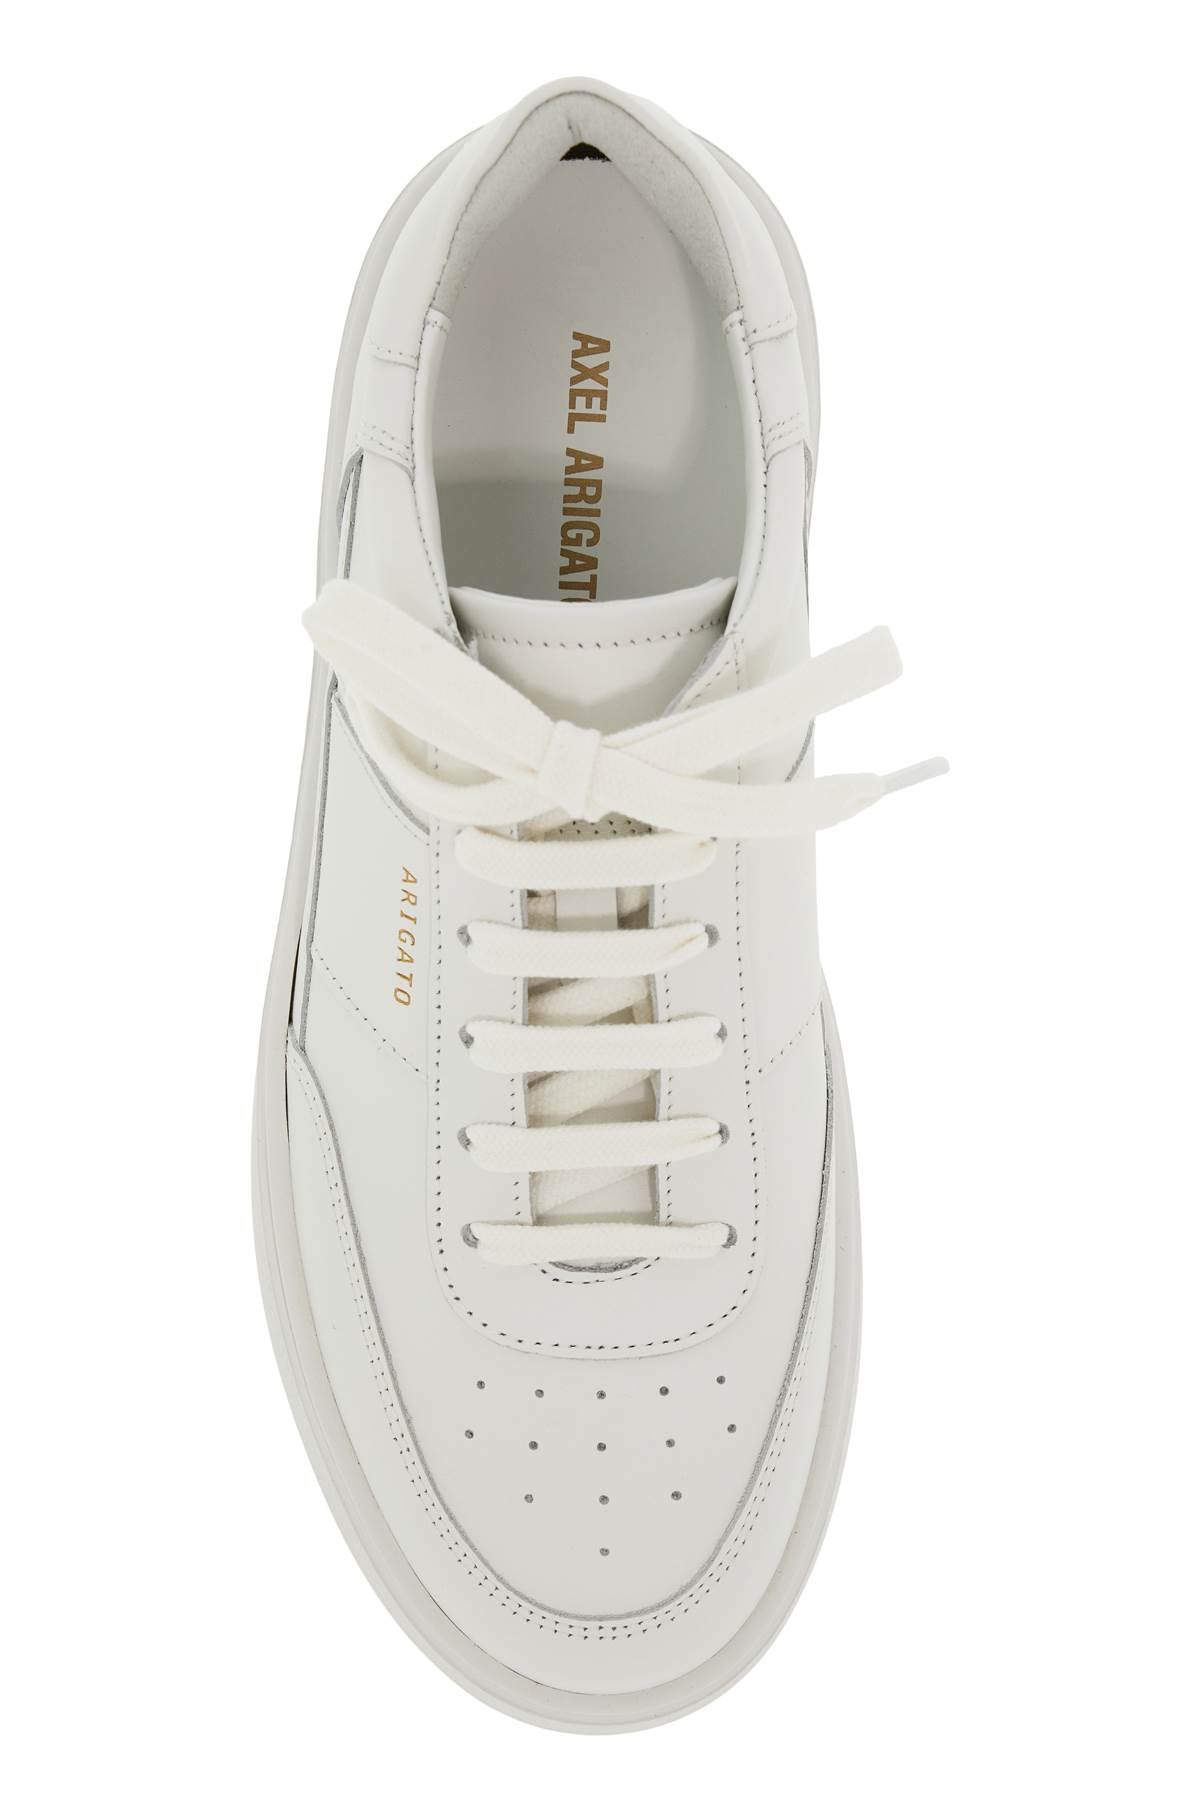 vintage orbit sneakers collection - White